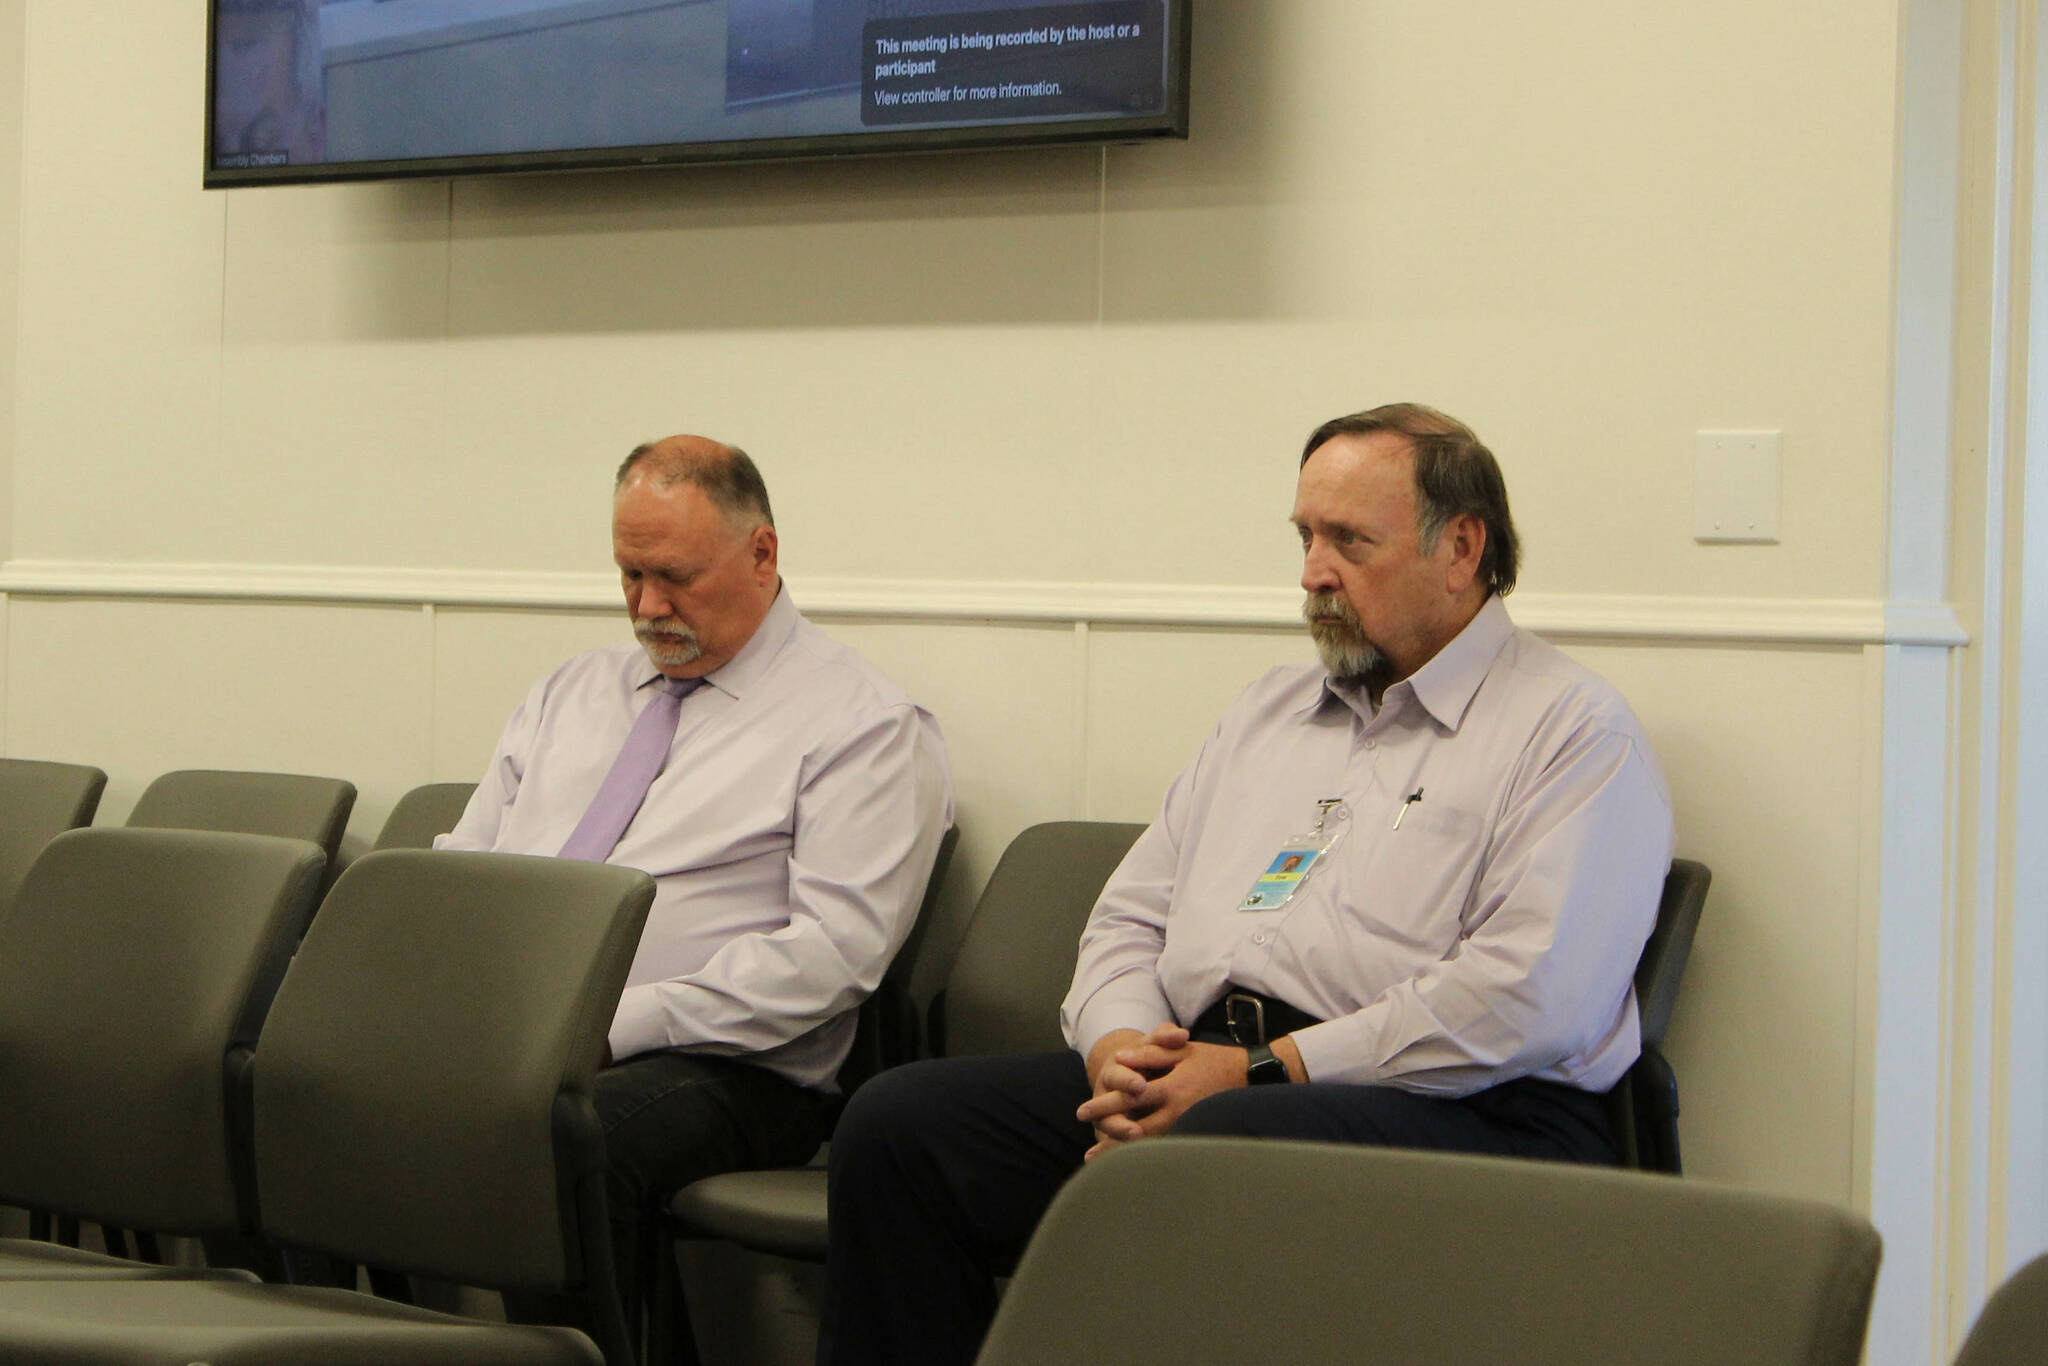 Kevin Lyon (left) and John Hedges (right) attend a meeting of the Kenai Peninsula Borough Assembly on Tuesday, June 21, 2022 in Soldotna, Alaska. The two have worked to address deferred maintenance at Kenai Peninsula Borough School District facilities. (Ashlyn O’Hara/Peninsula Clarion)